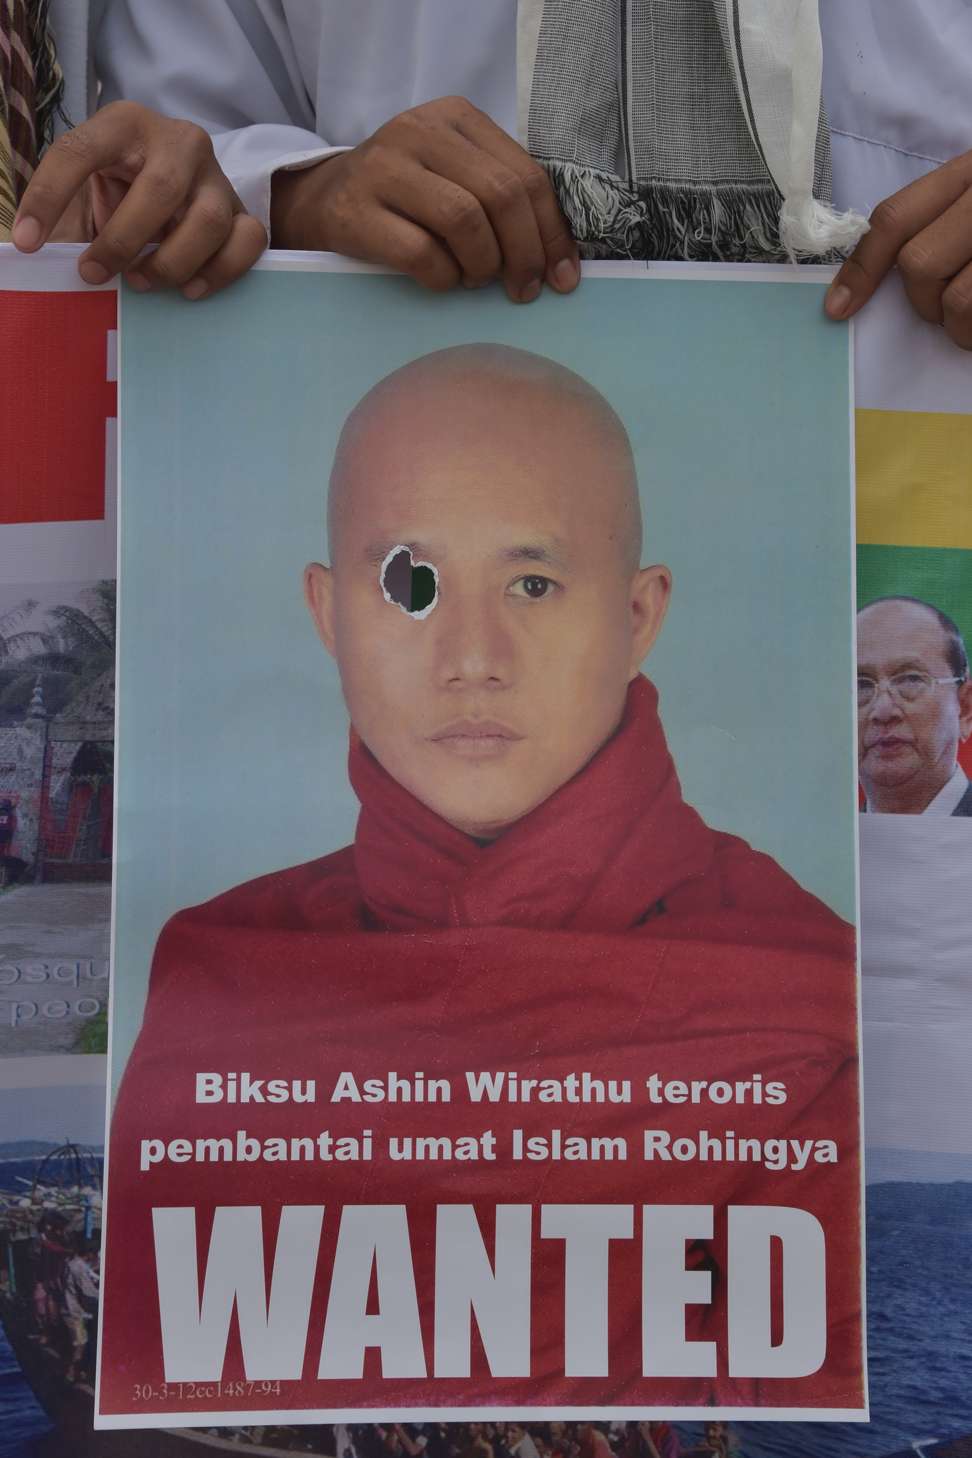 An activist holds a wanted poster of Myanmar hardline Buddhist monk Ashin Wirathu during a rally in support of Rohingya Muslims from Myanmar in Indonesia. File photo: AFP